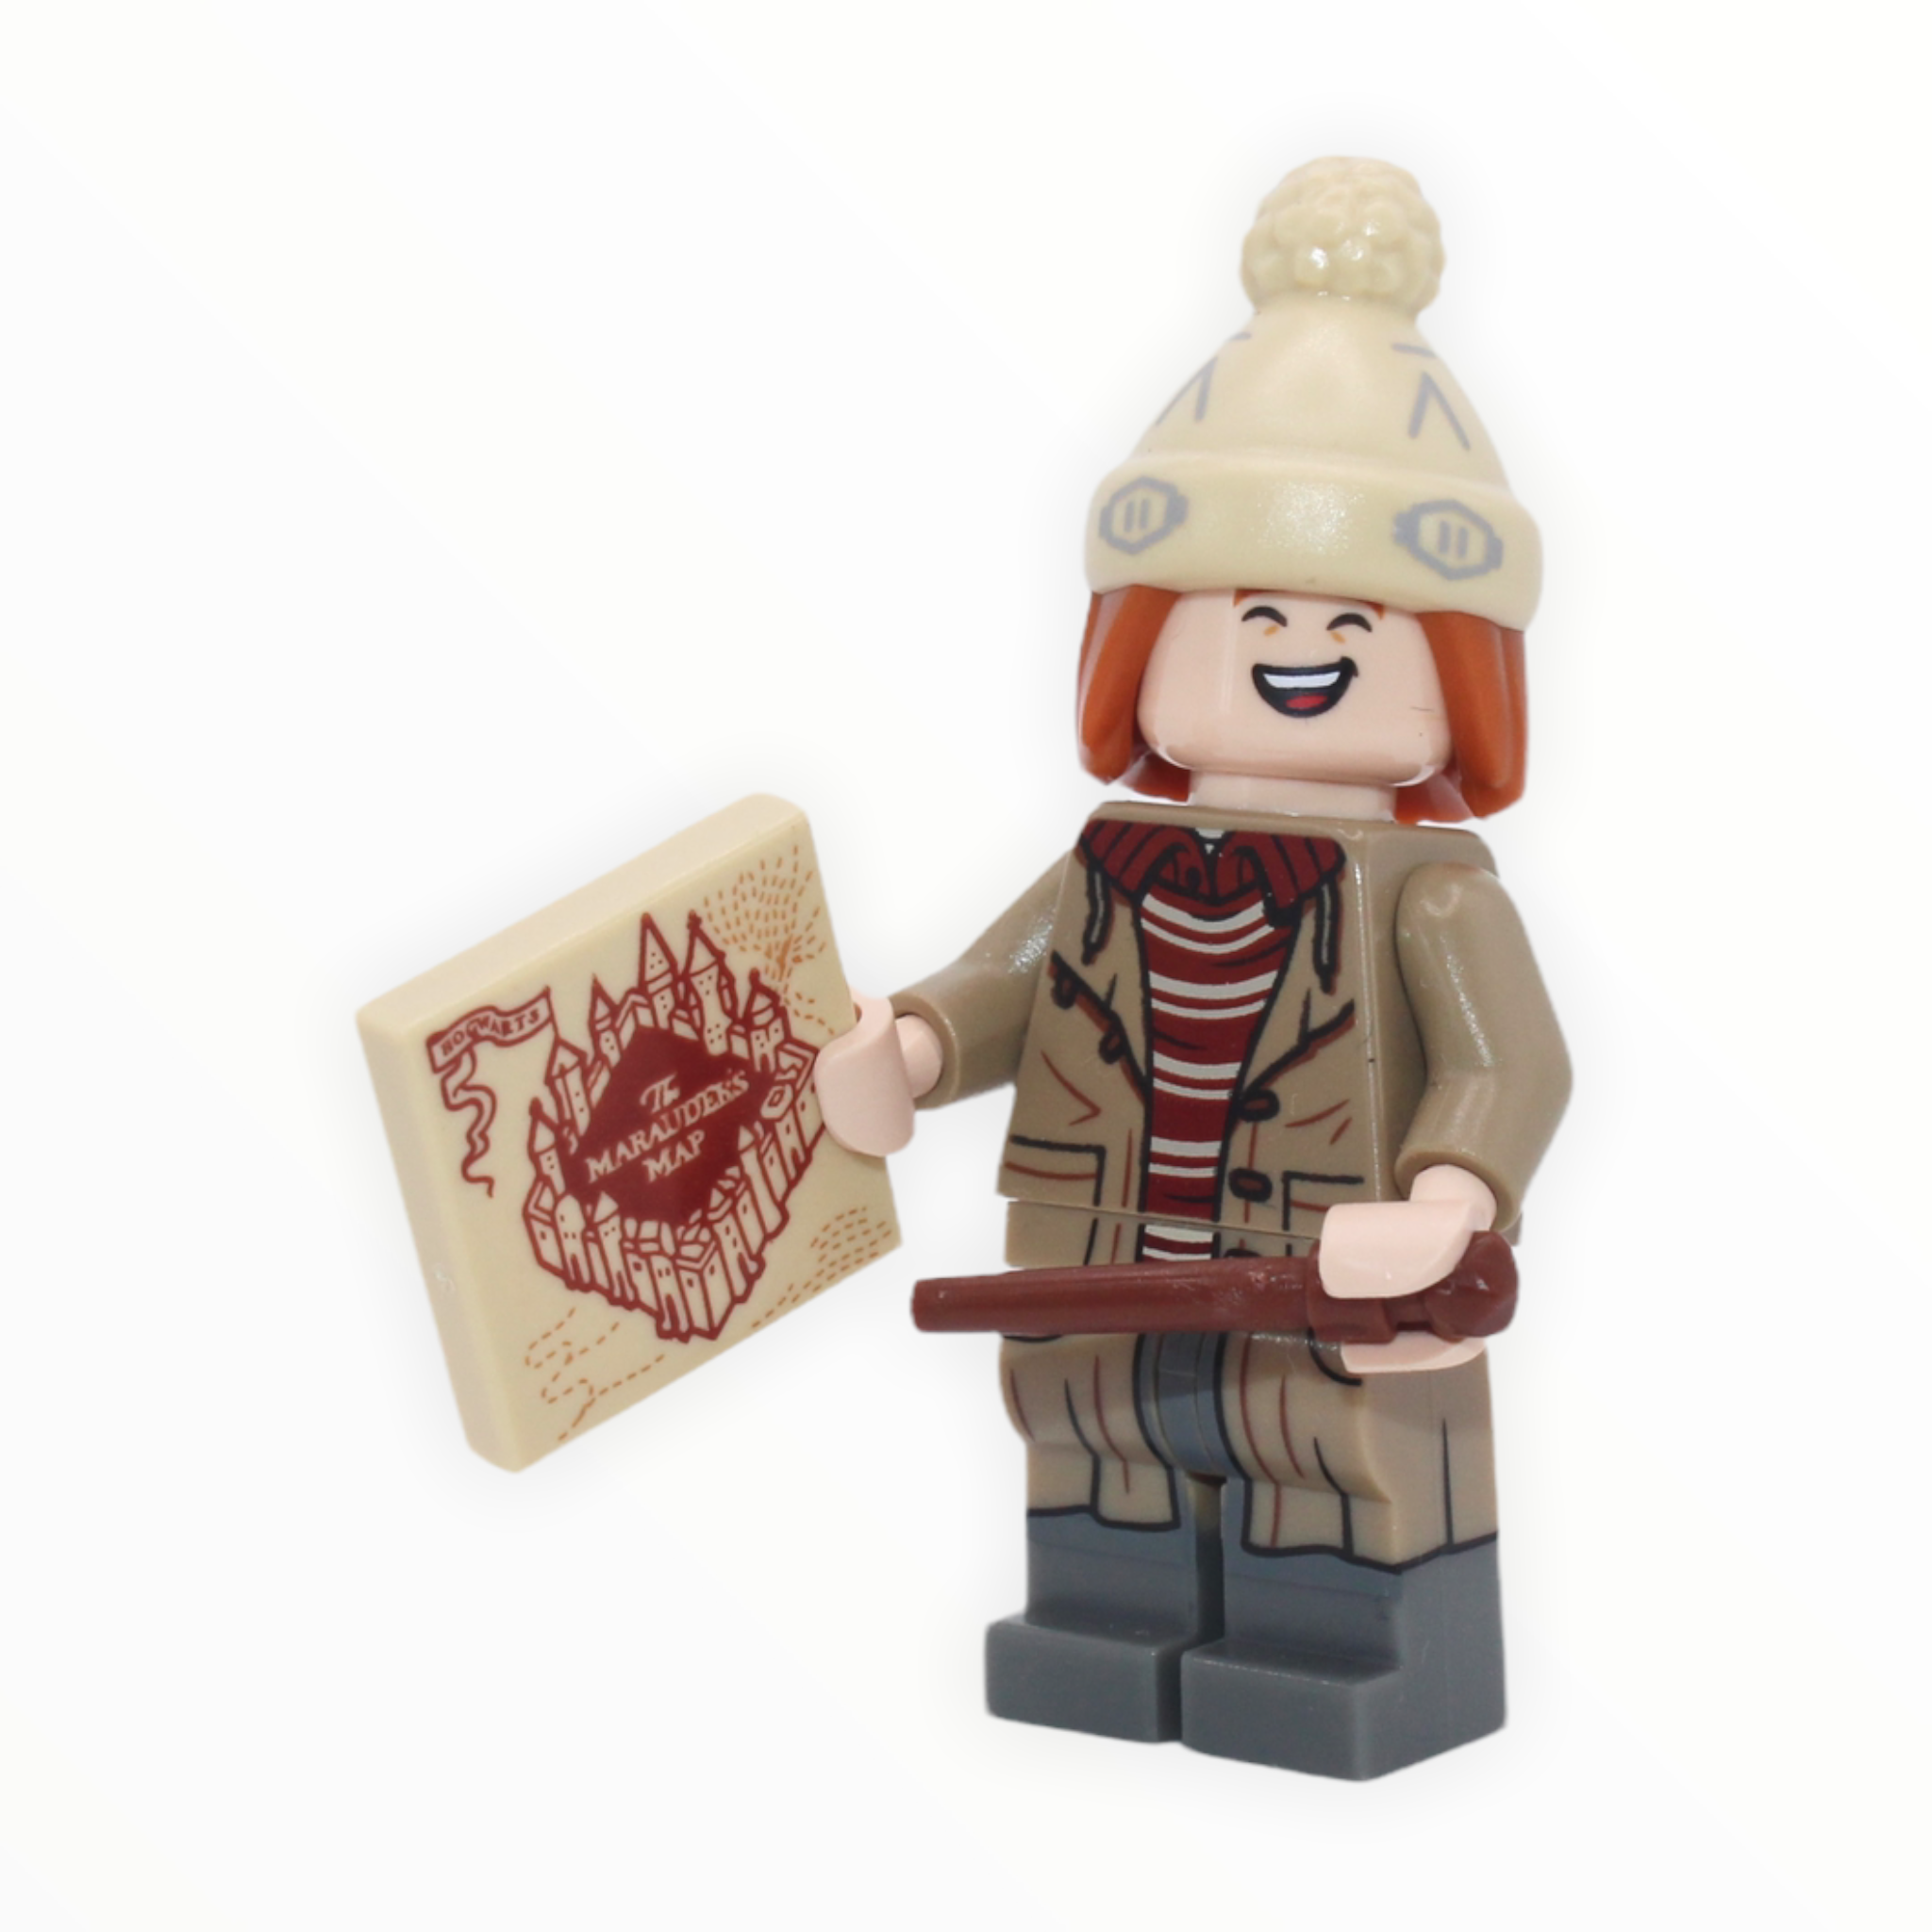 Harry Potter Series 2: George Weasley with Marauder’s Map